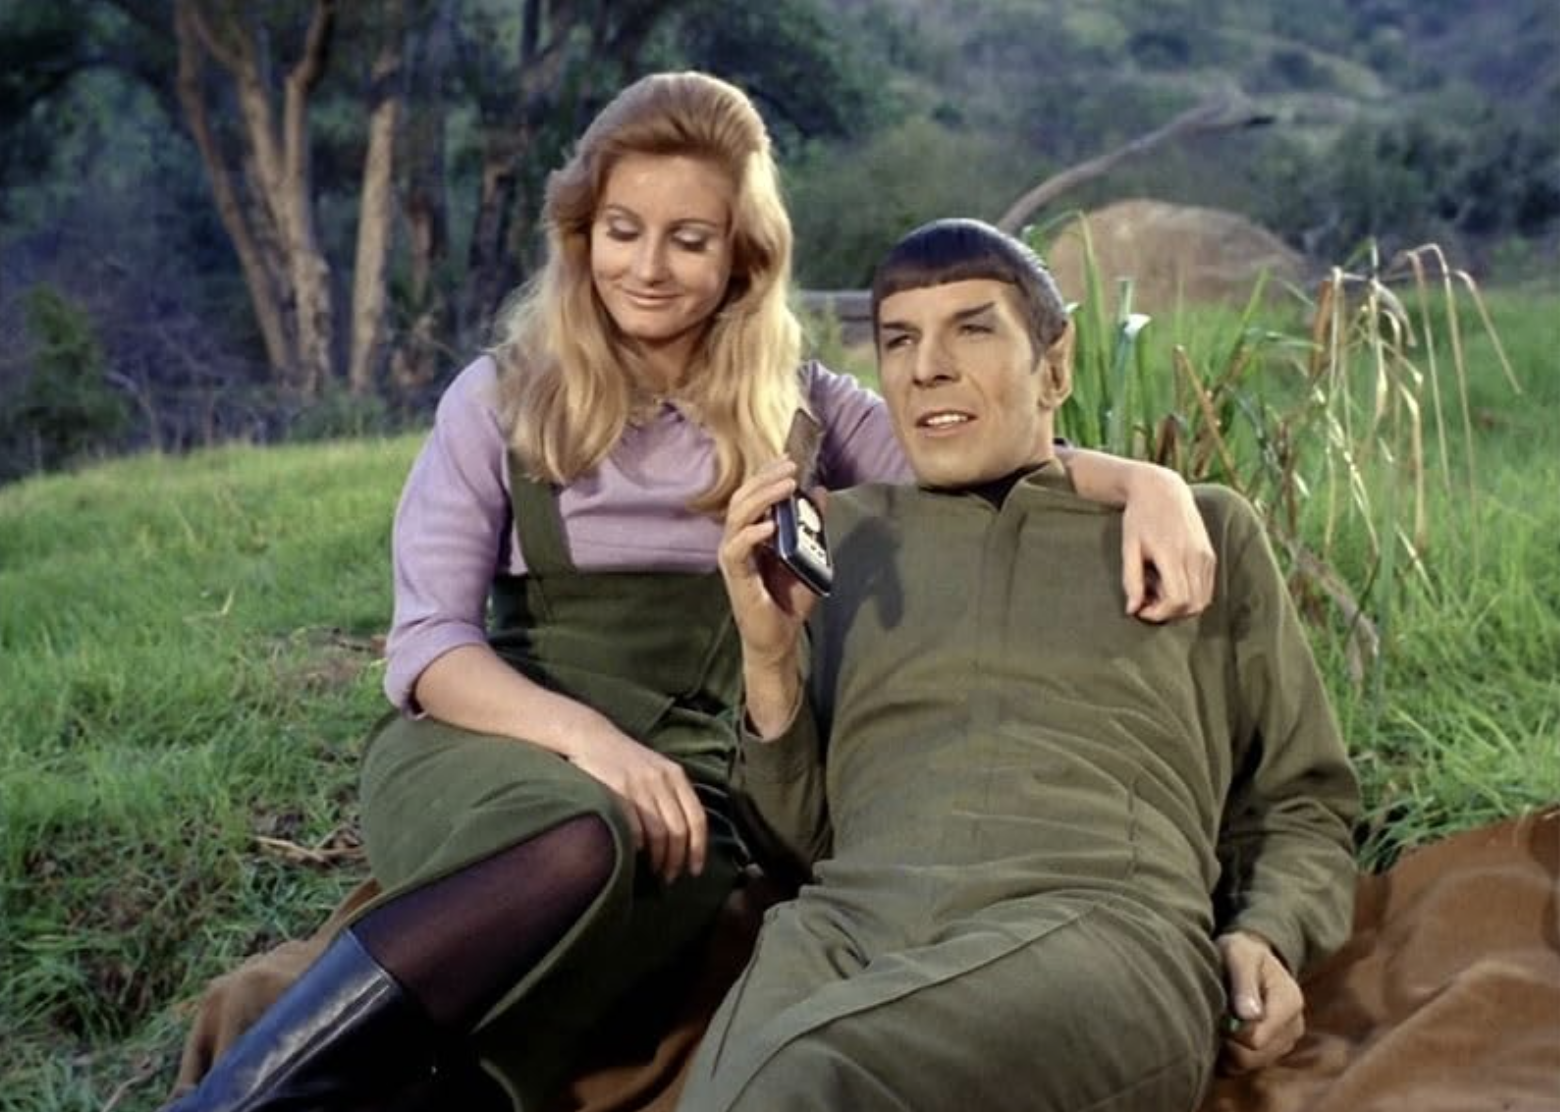 <p>- IMDb user rating: 7.8<br> - Season 1, Episode 24<br> - Director: Ralph Senensky</p>  <p>Spock is often paired with short-term romantic interests in "Star Trek," and Episode 24 of the first season features one in the character Kalomi. Spock reunites with this botanist from his past on an away mission—he, Kirk, and McCoy beam down to a colony to find that all of its inhabitants are affected by spores that invoke an overly positive and lethargic attitude. For the half-human, half-Vulcan character Spock, it was another opportune time for him to explore his emotions as he found himself under the same influence.</p>